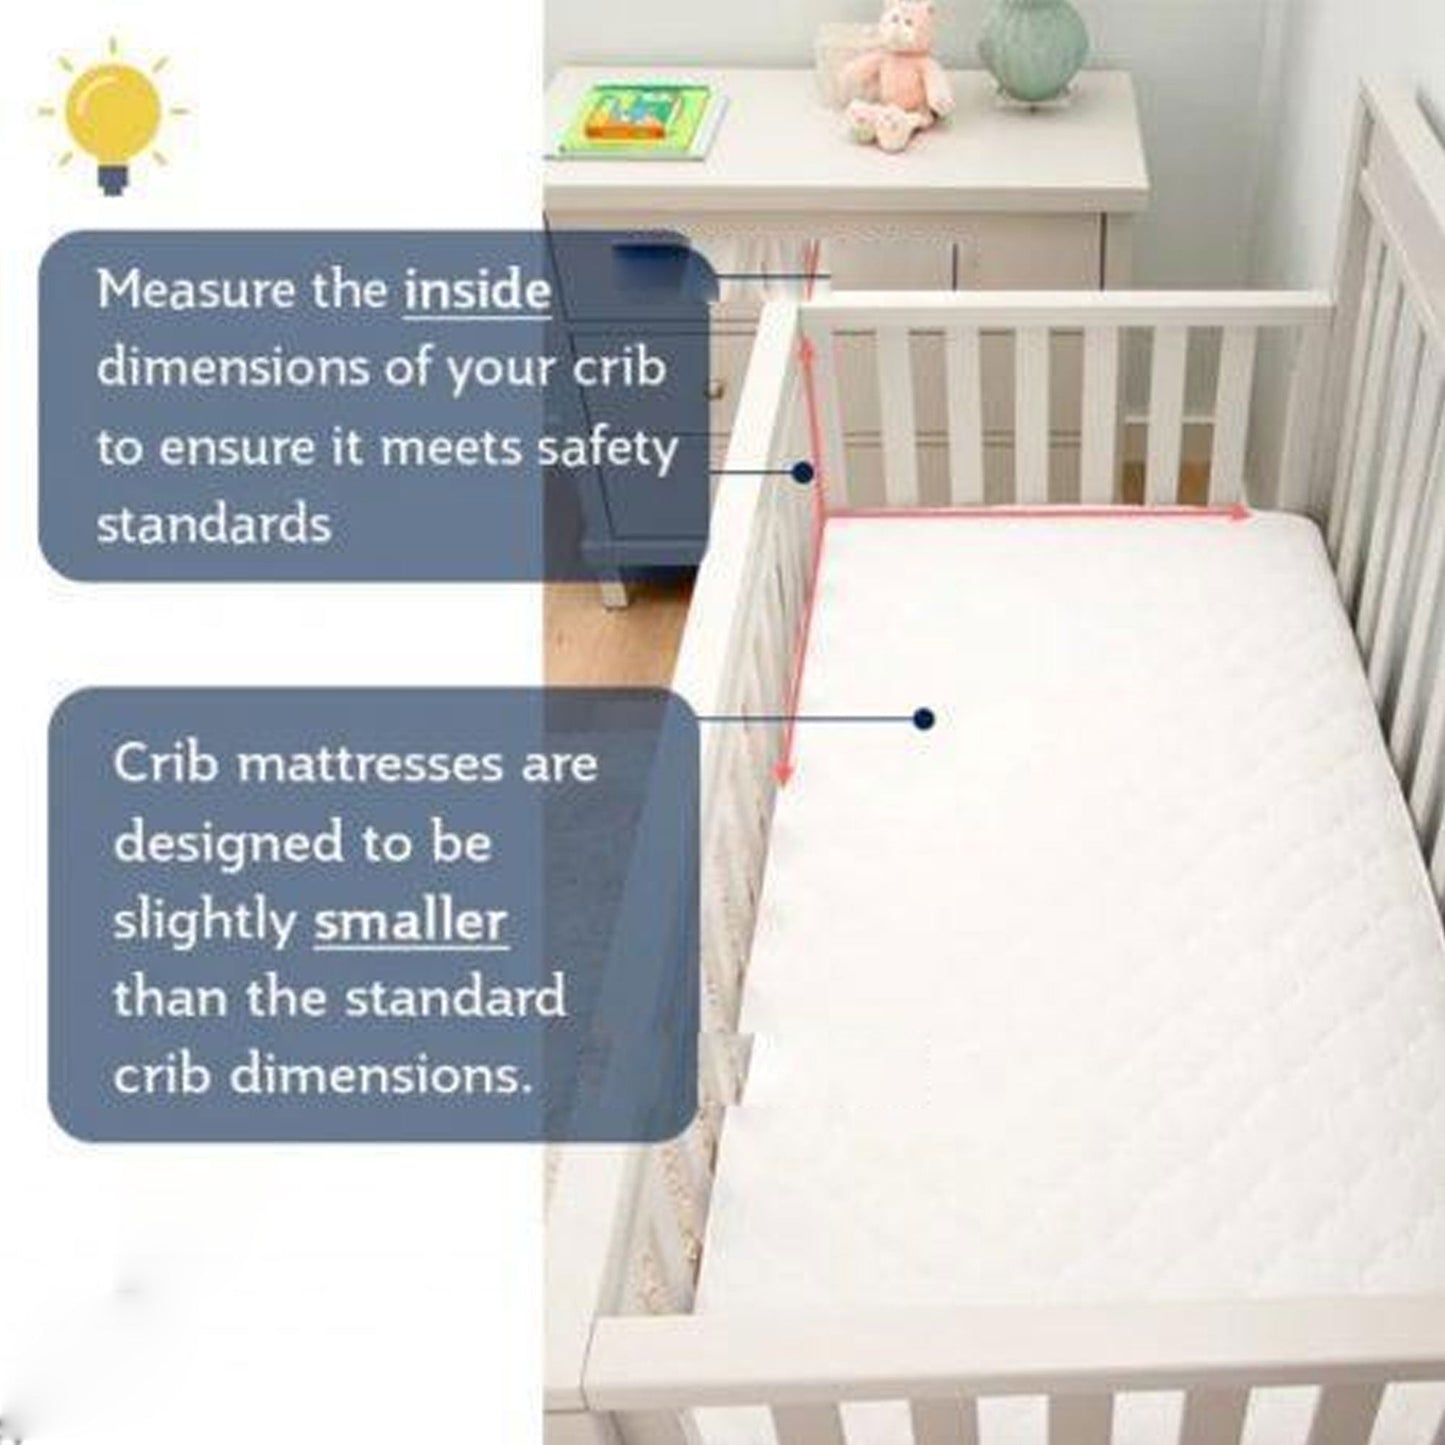 84 X 35 X 4 CM - CRIB Breathable Quilted Cot Baby Mattress - TheComfortshop.co.ukNursery Bedding0721718957164thecomfortshopTheComfortshop.co.ukCrib 84 x 3584 X 35 X 4 CM - CRIB Breathable Quilted Cot Baby Mattress - TheComfortshop.co.uk